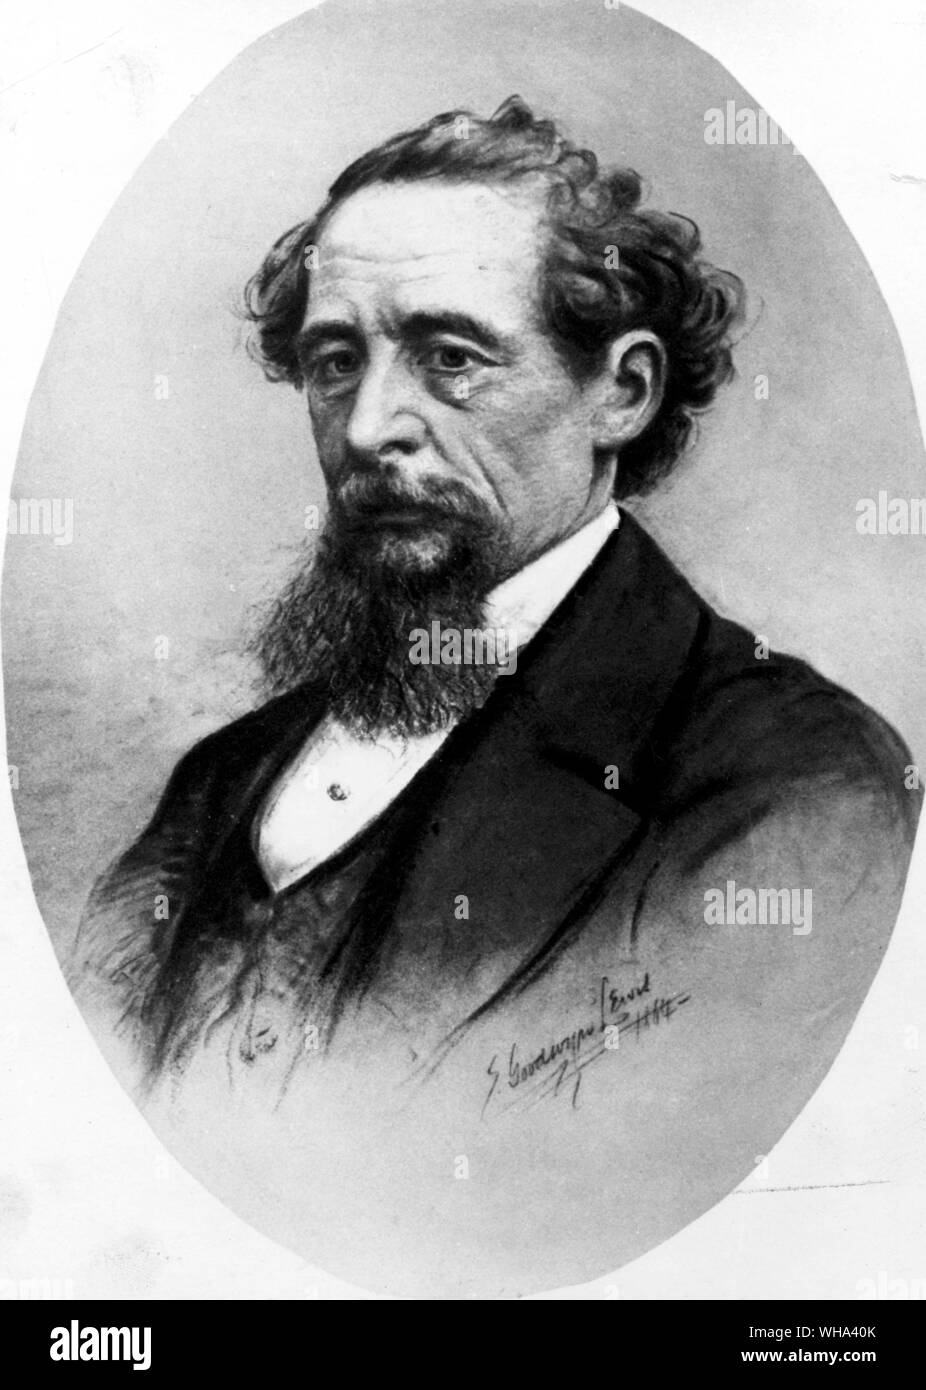 Charles Dickens. Dickens, Charles John Huffam (pseudonym Boz) English novelist; wrote novels Pickwick Papers 1836-1837, Oliver Twist 1837-1839, A Christmas Carol 1843, Bleak House 1852-1853, A Tale of Two Cities 1859  1812-1870 . . . . . Stock Photo